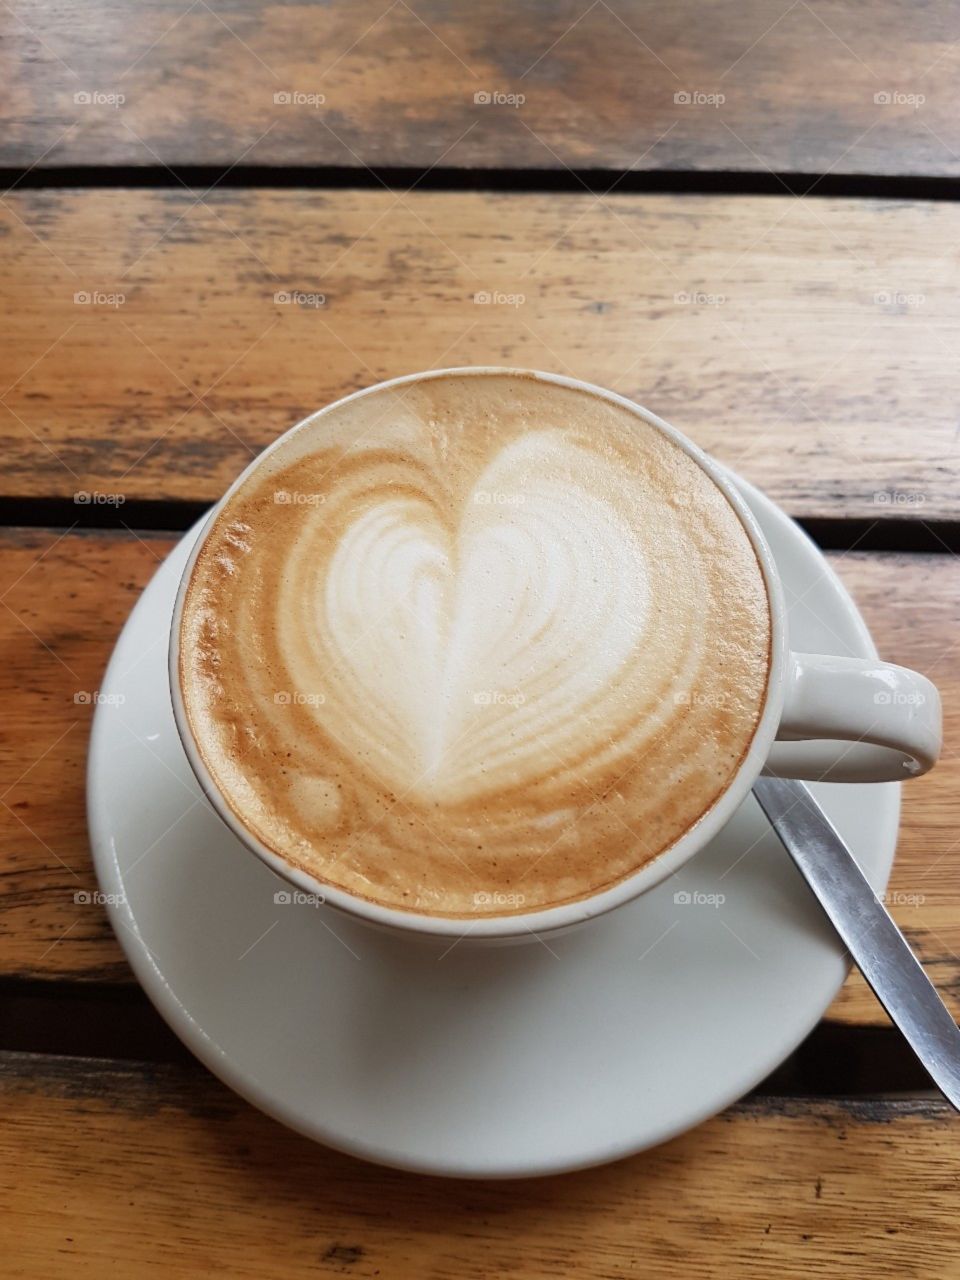 Heart shape on froth of Cuppuccino